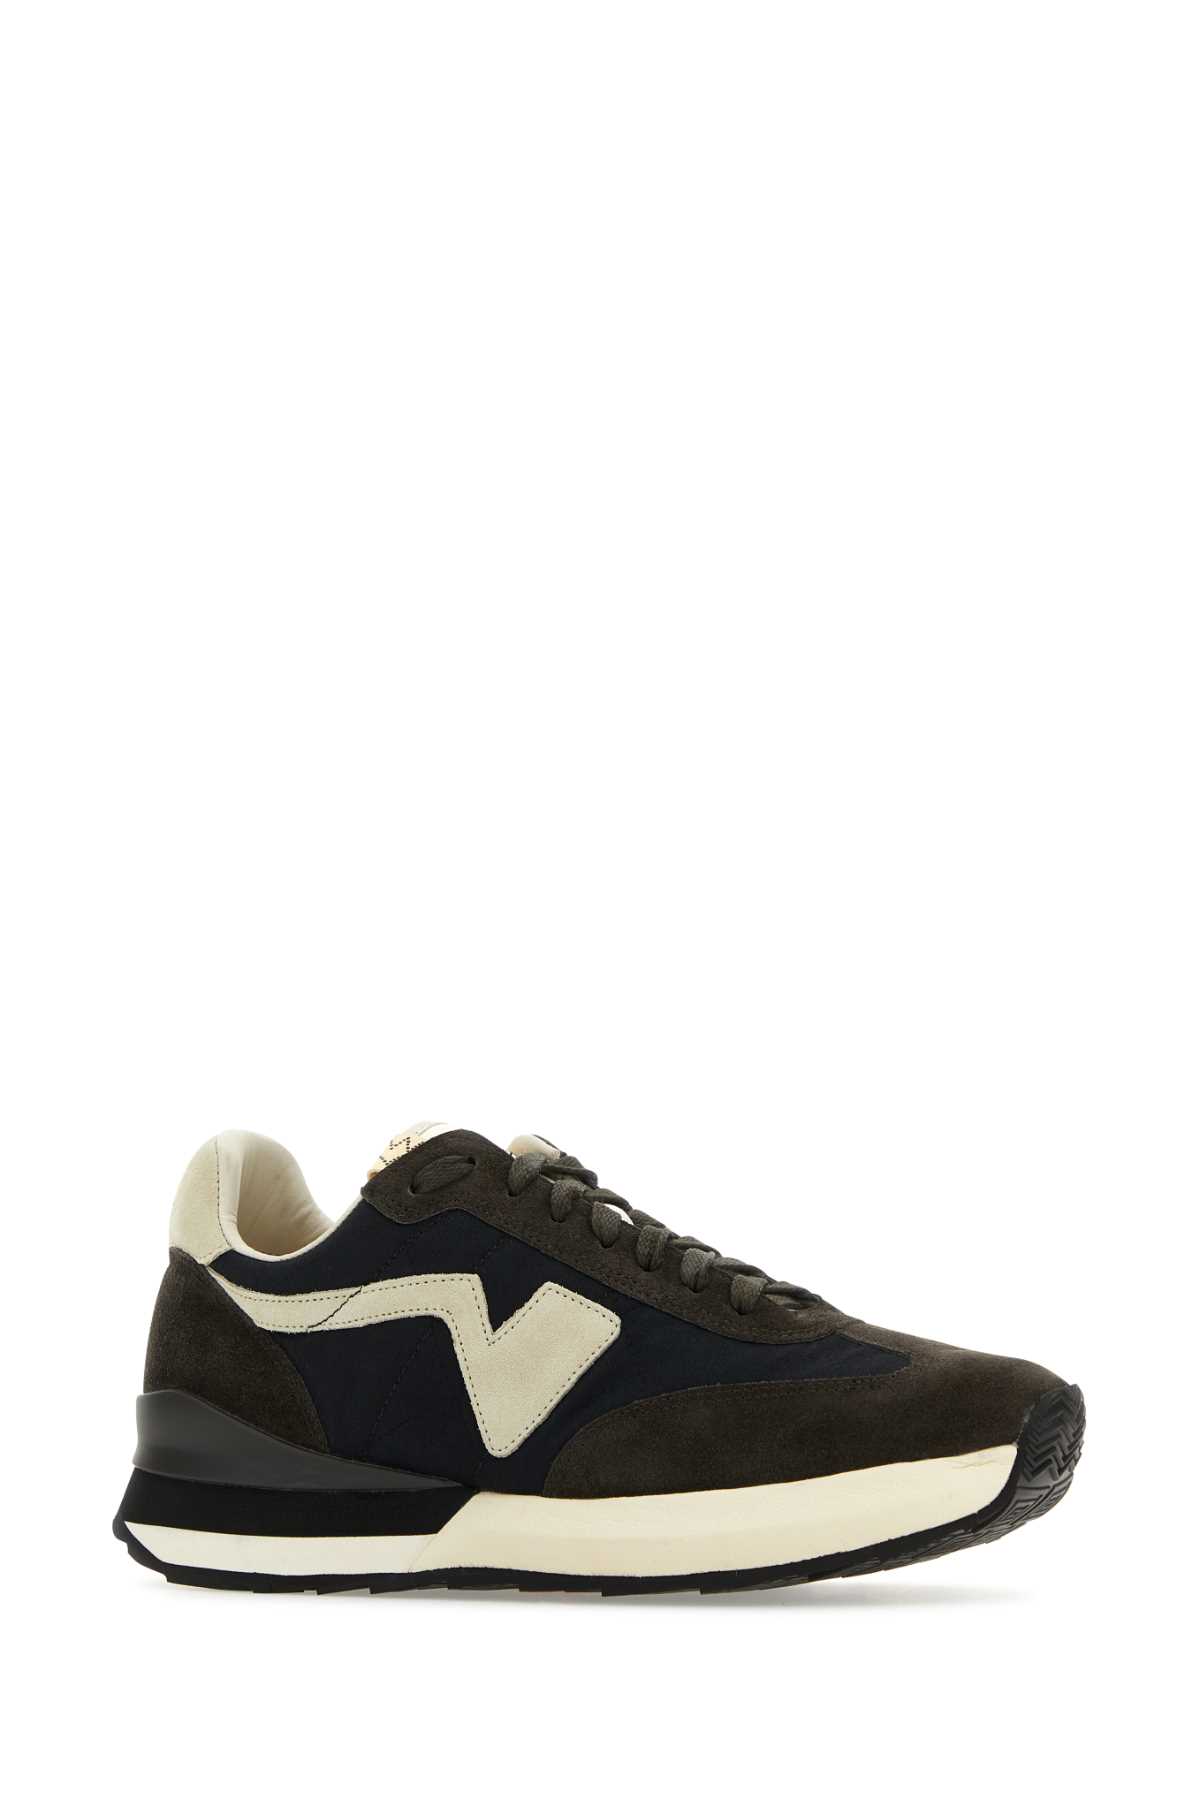 Shop Visvim Multicolor Fabric And Suede Dunand Trainer Sneakers In Black